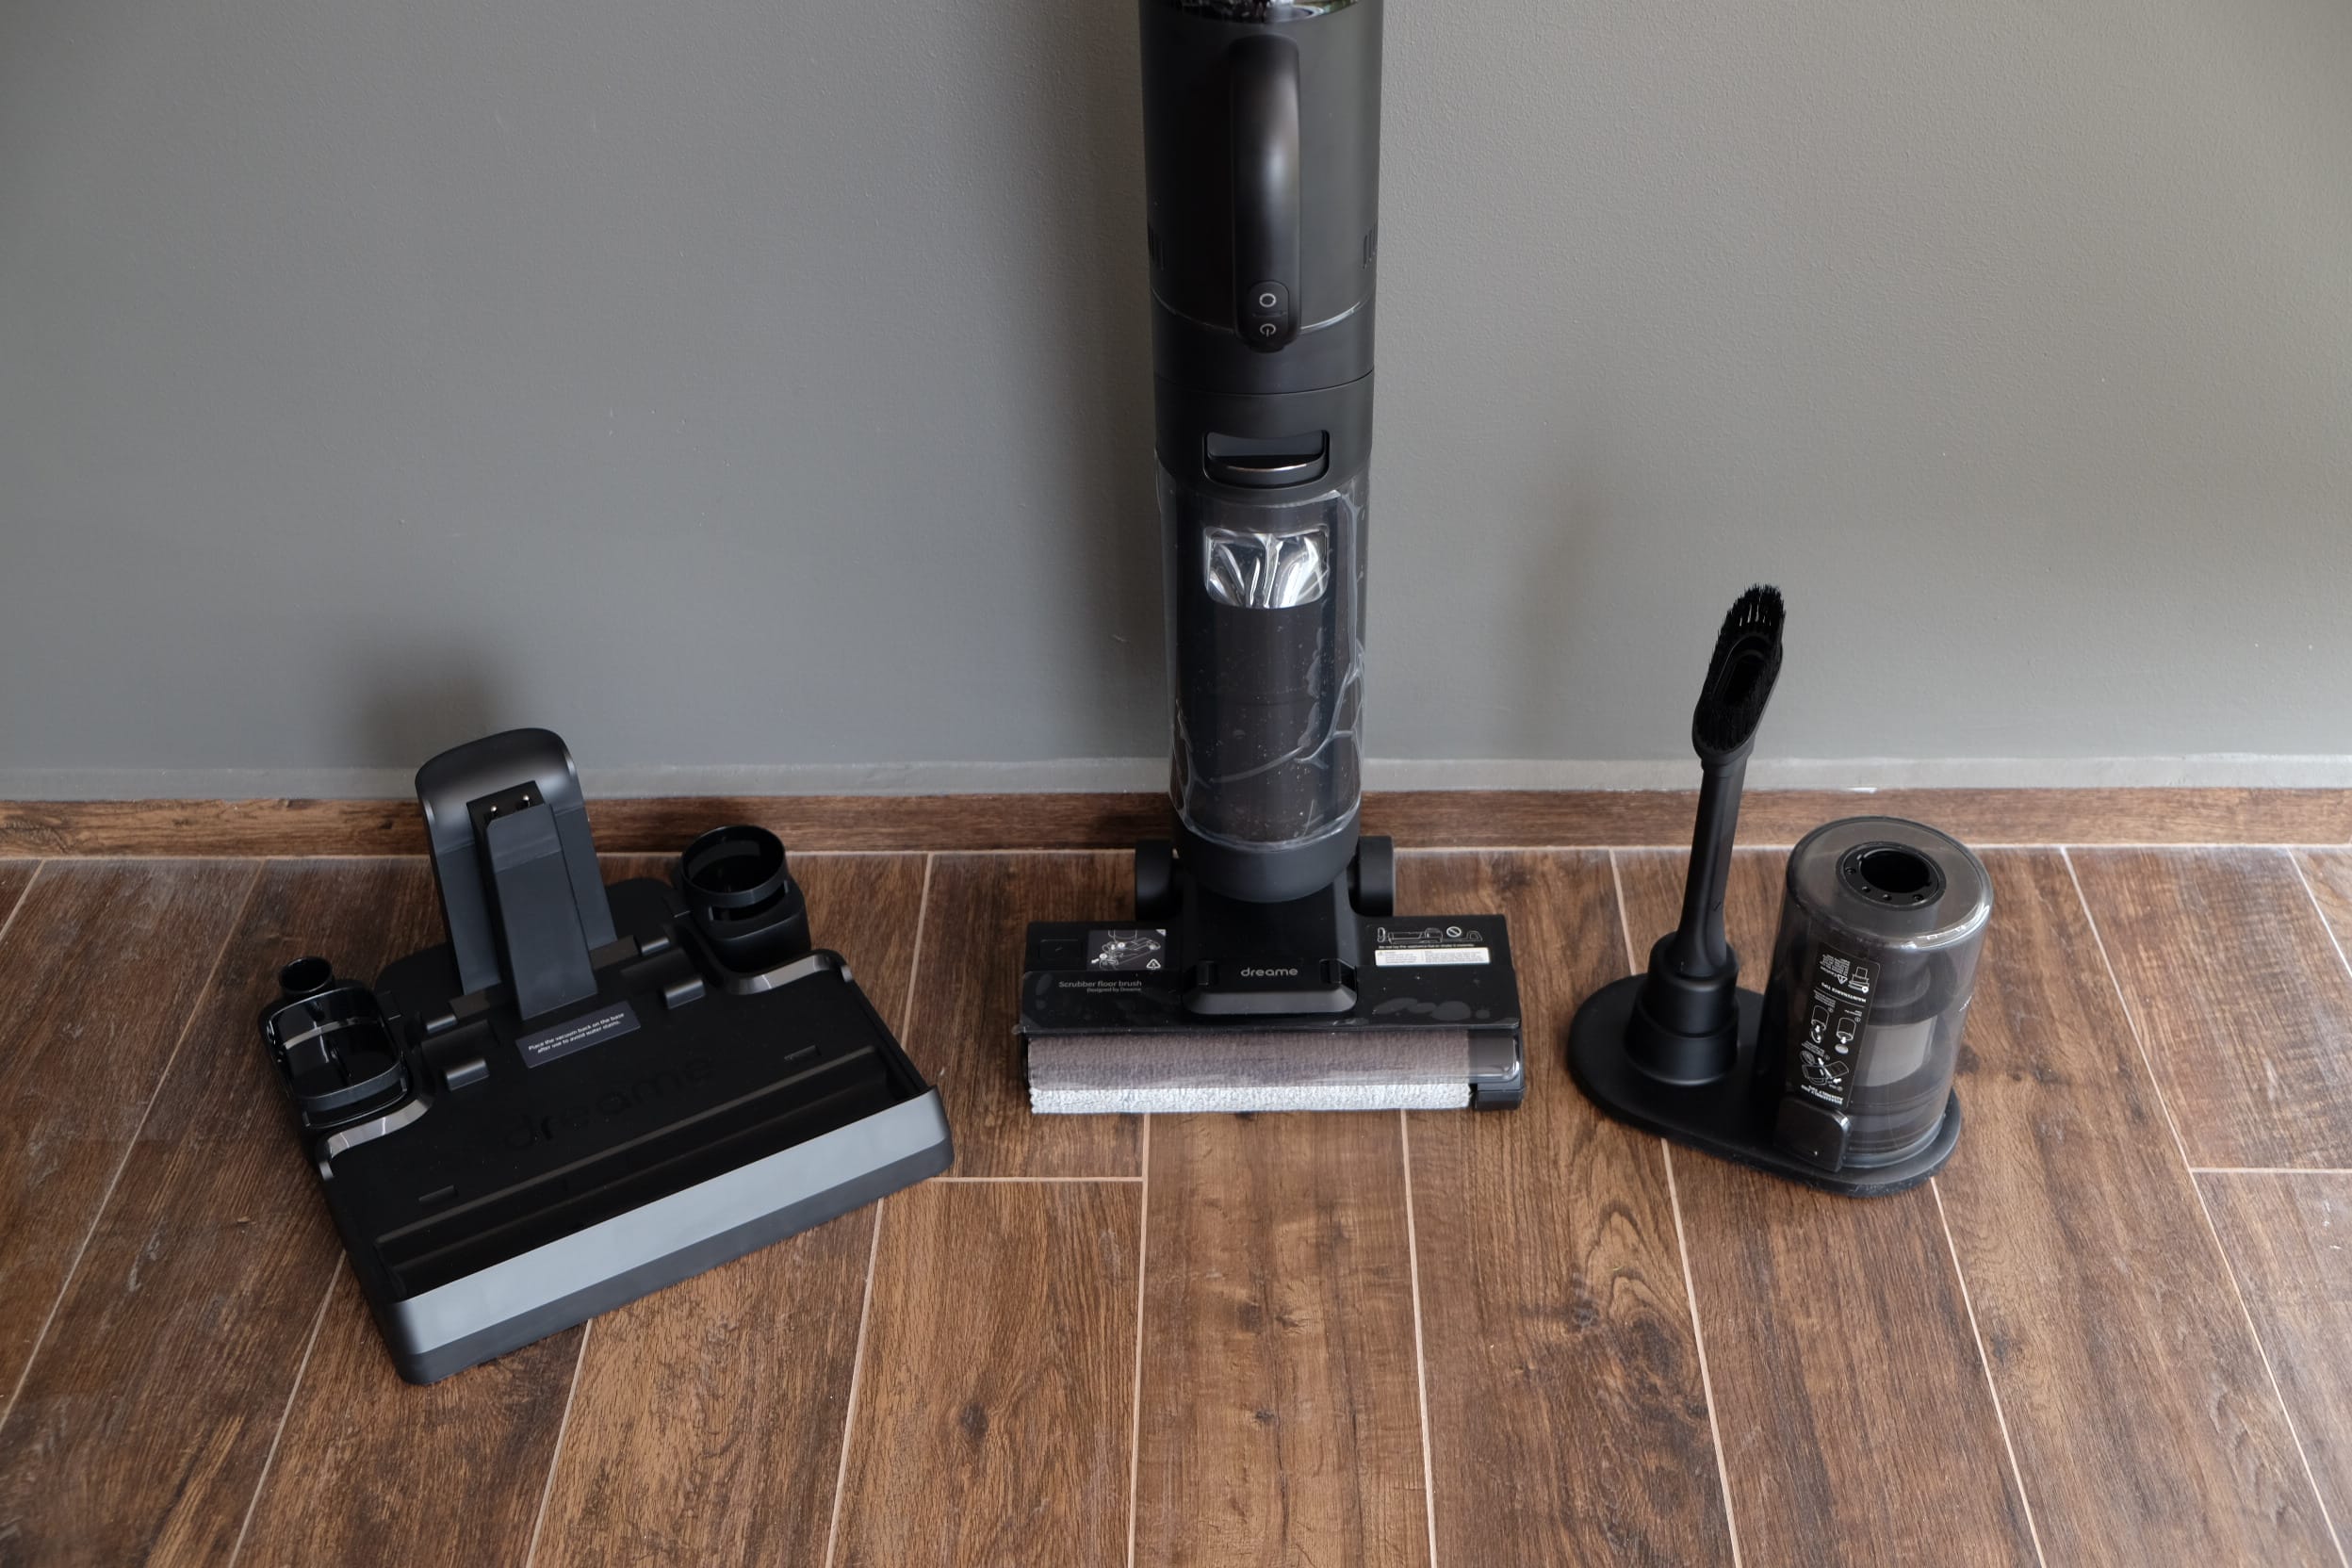 – Review: Wet Vacuum 2-in-1 Jio Dry & M12 Cleaner Dreame Tech